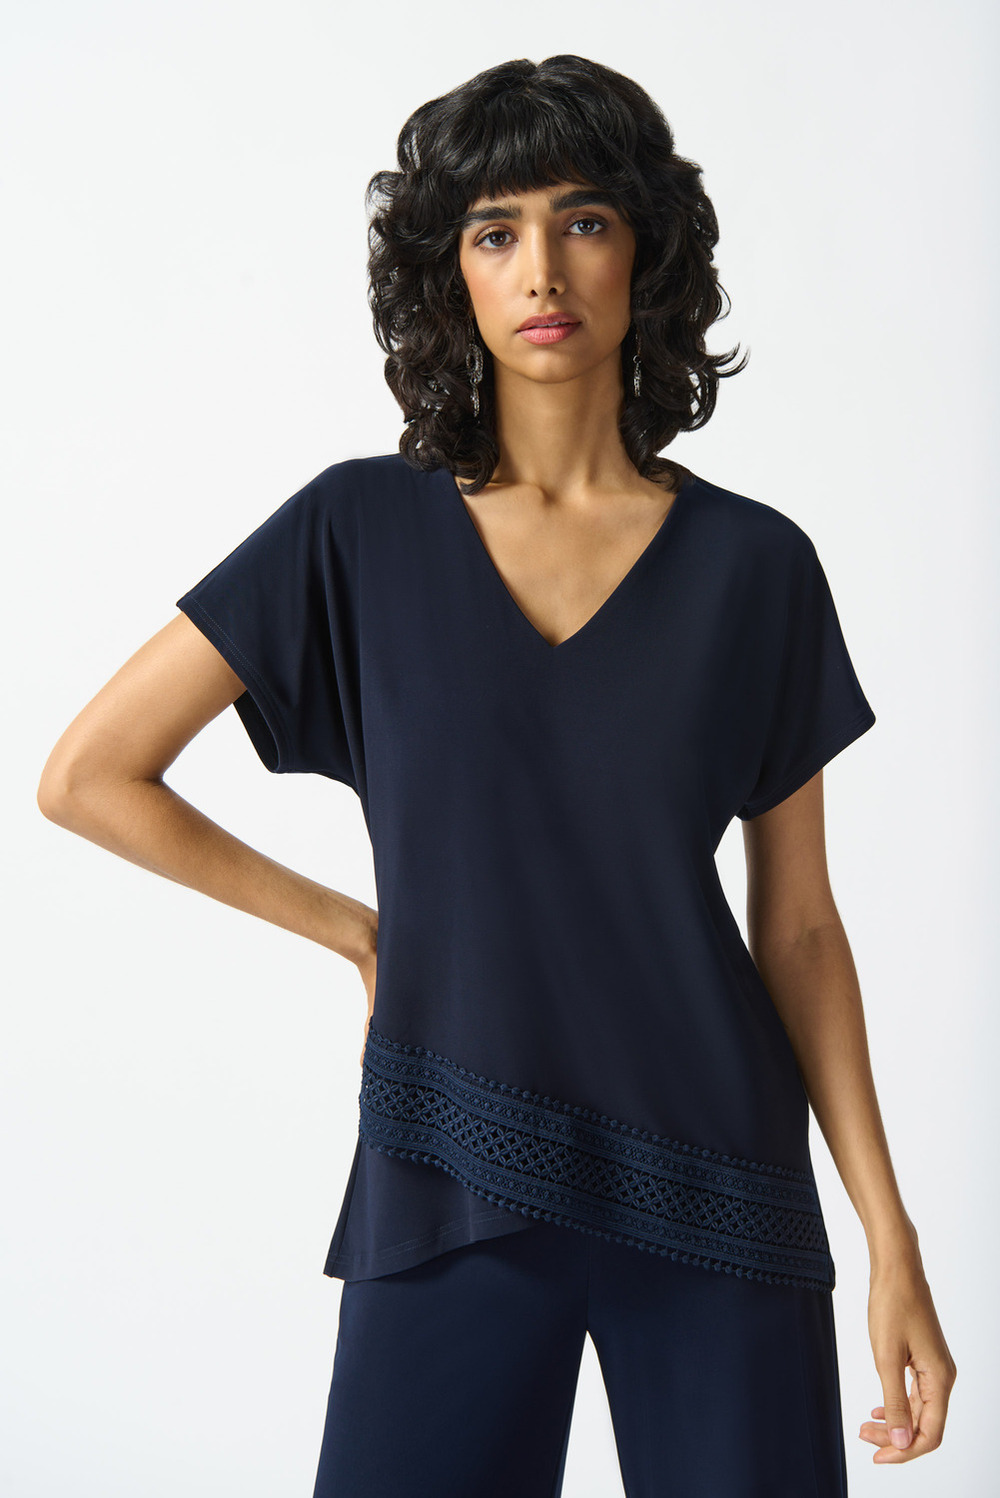 Lace Trim V-Neck Top Style 242132. Midnight Blue